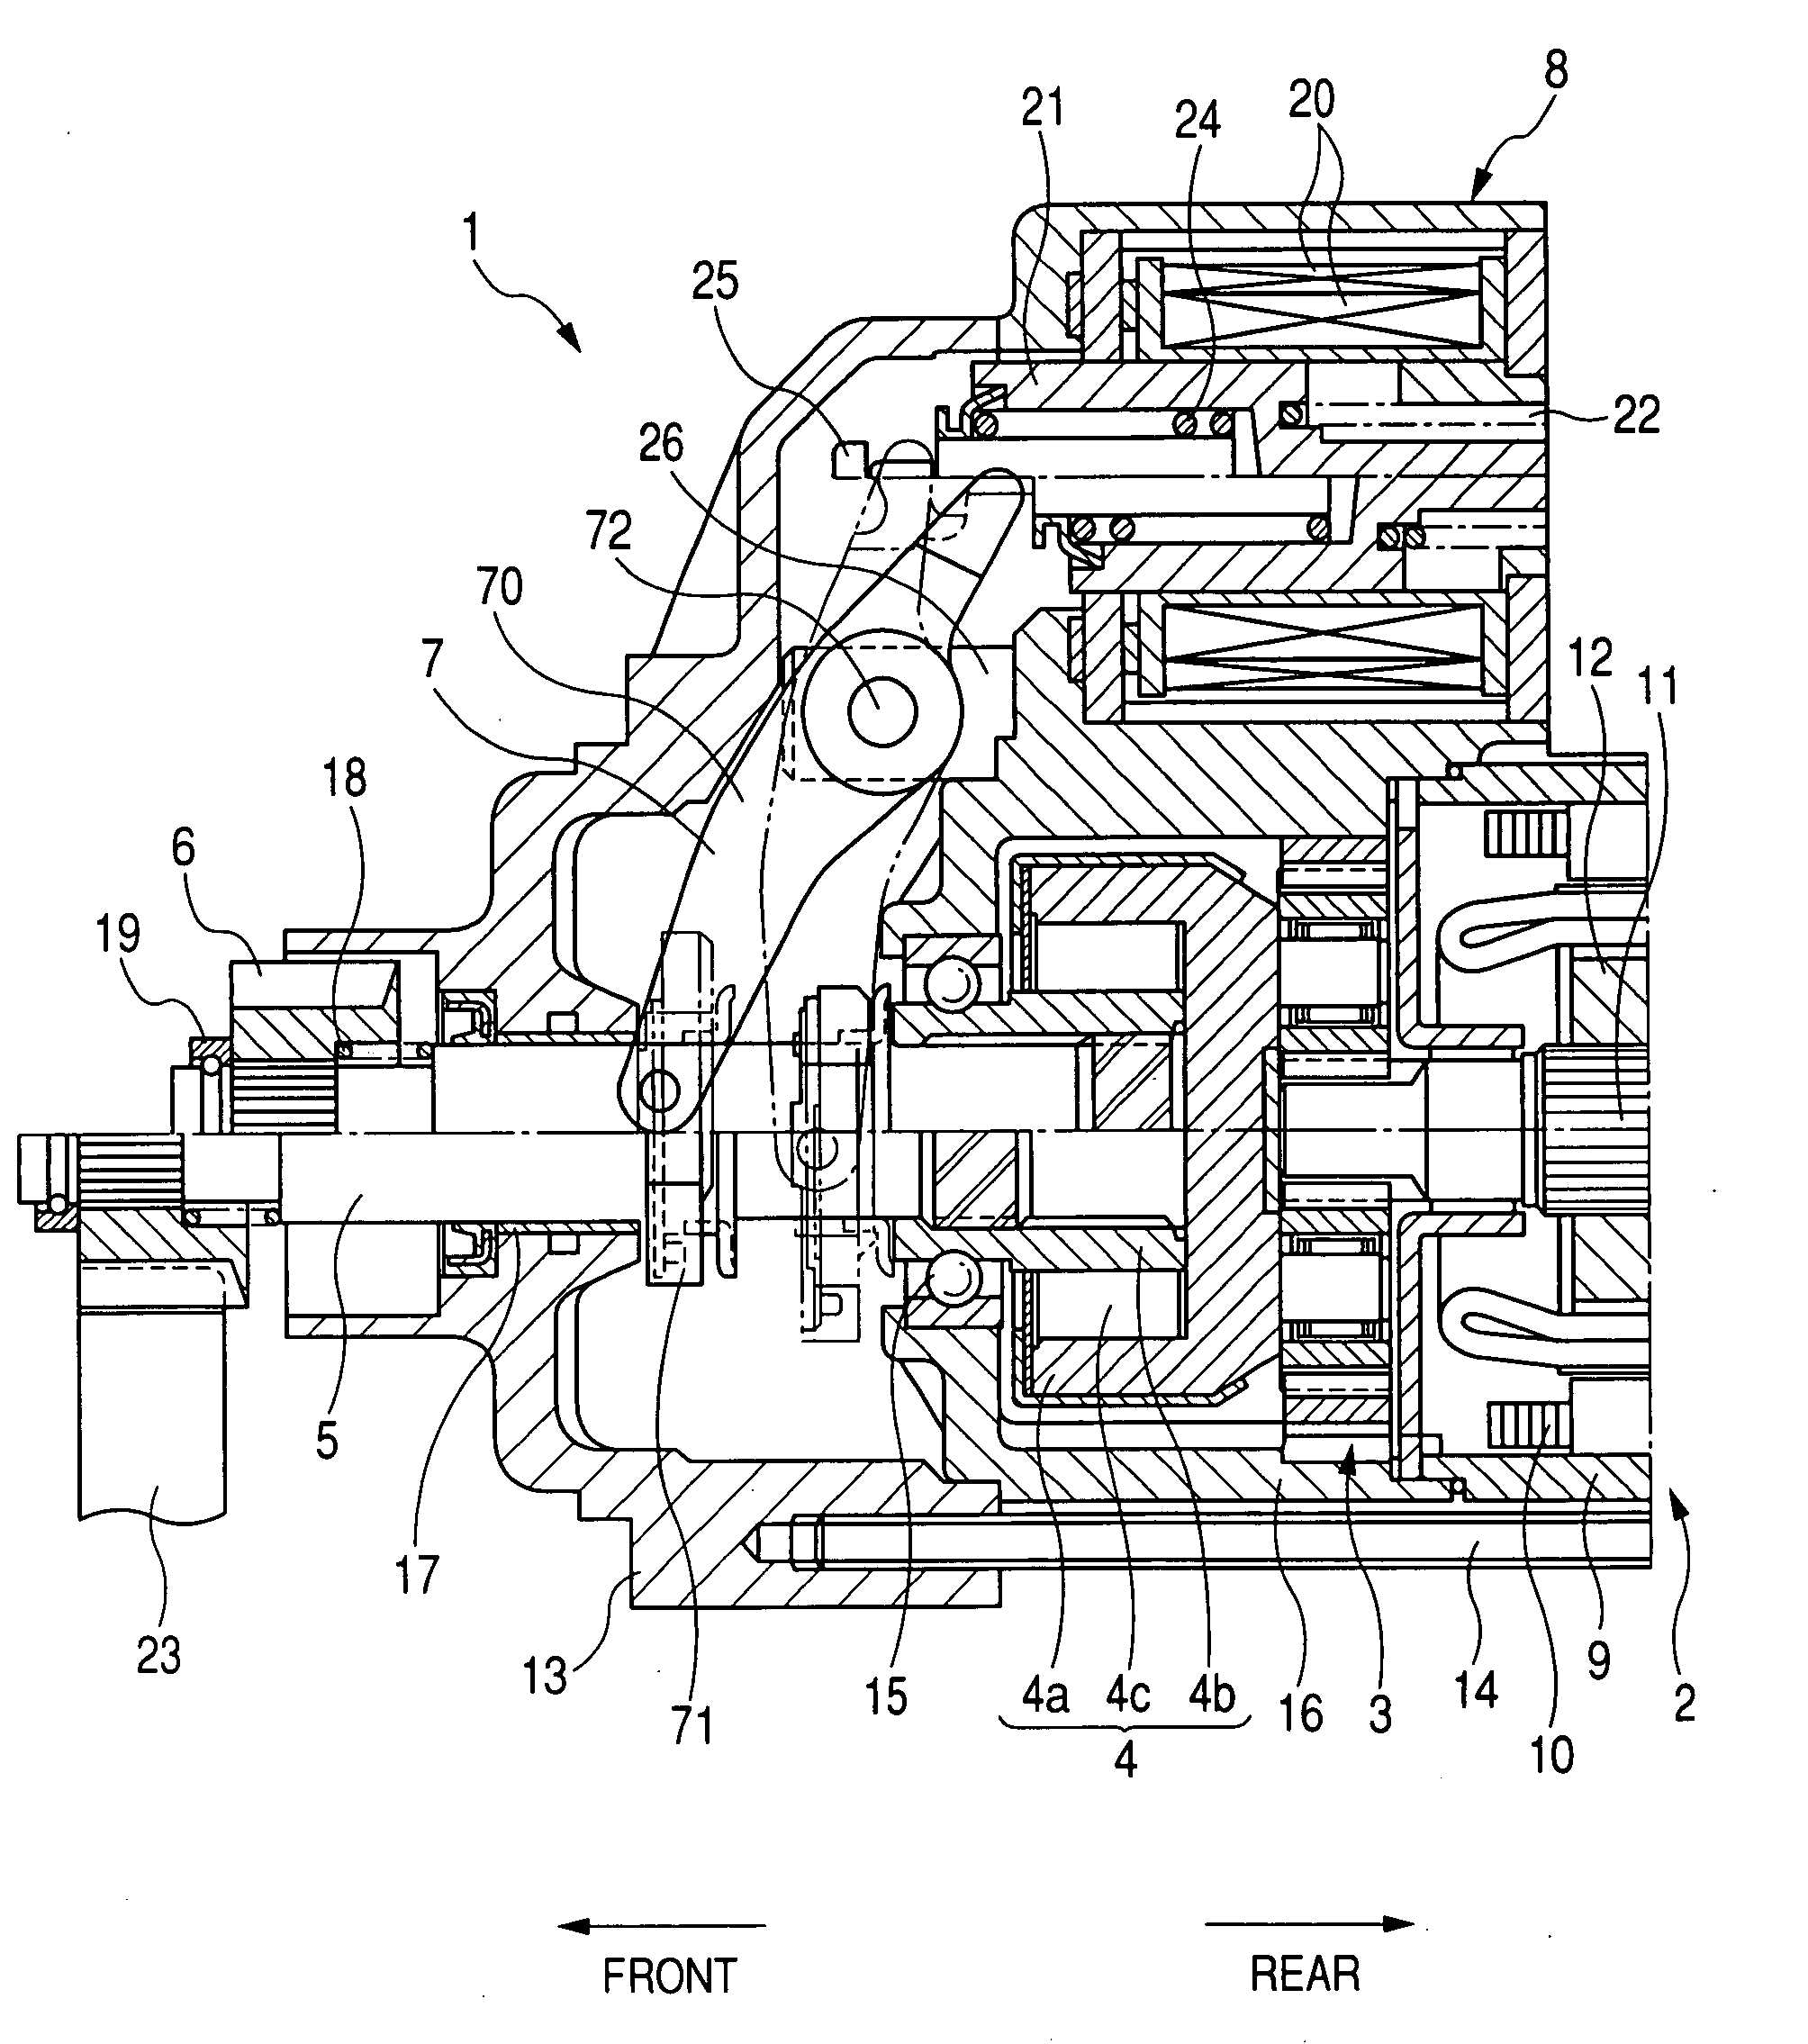 Engine starter having shift lever with lubricant-blocking wall